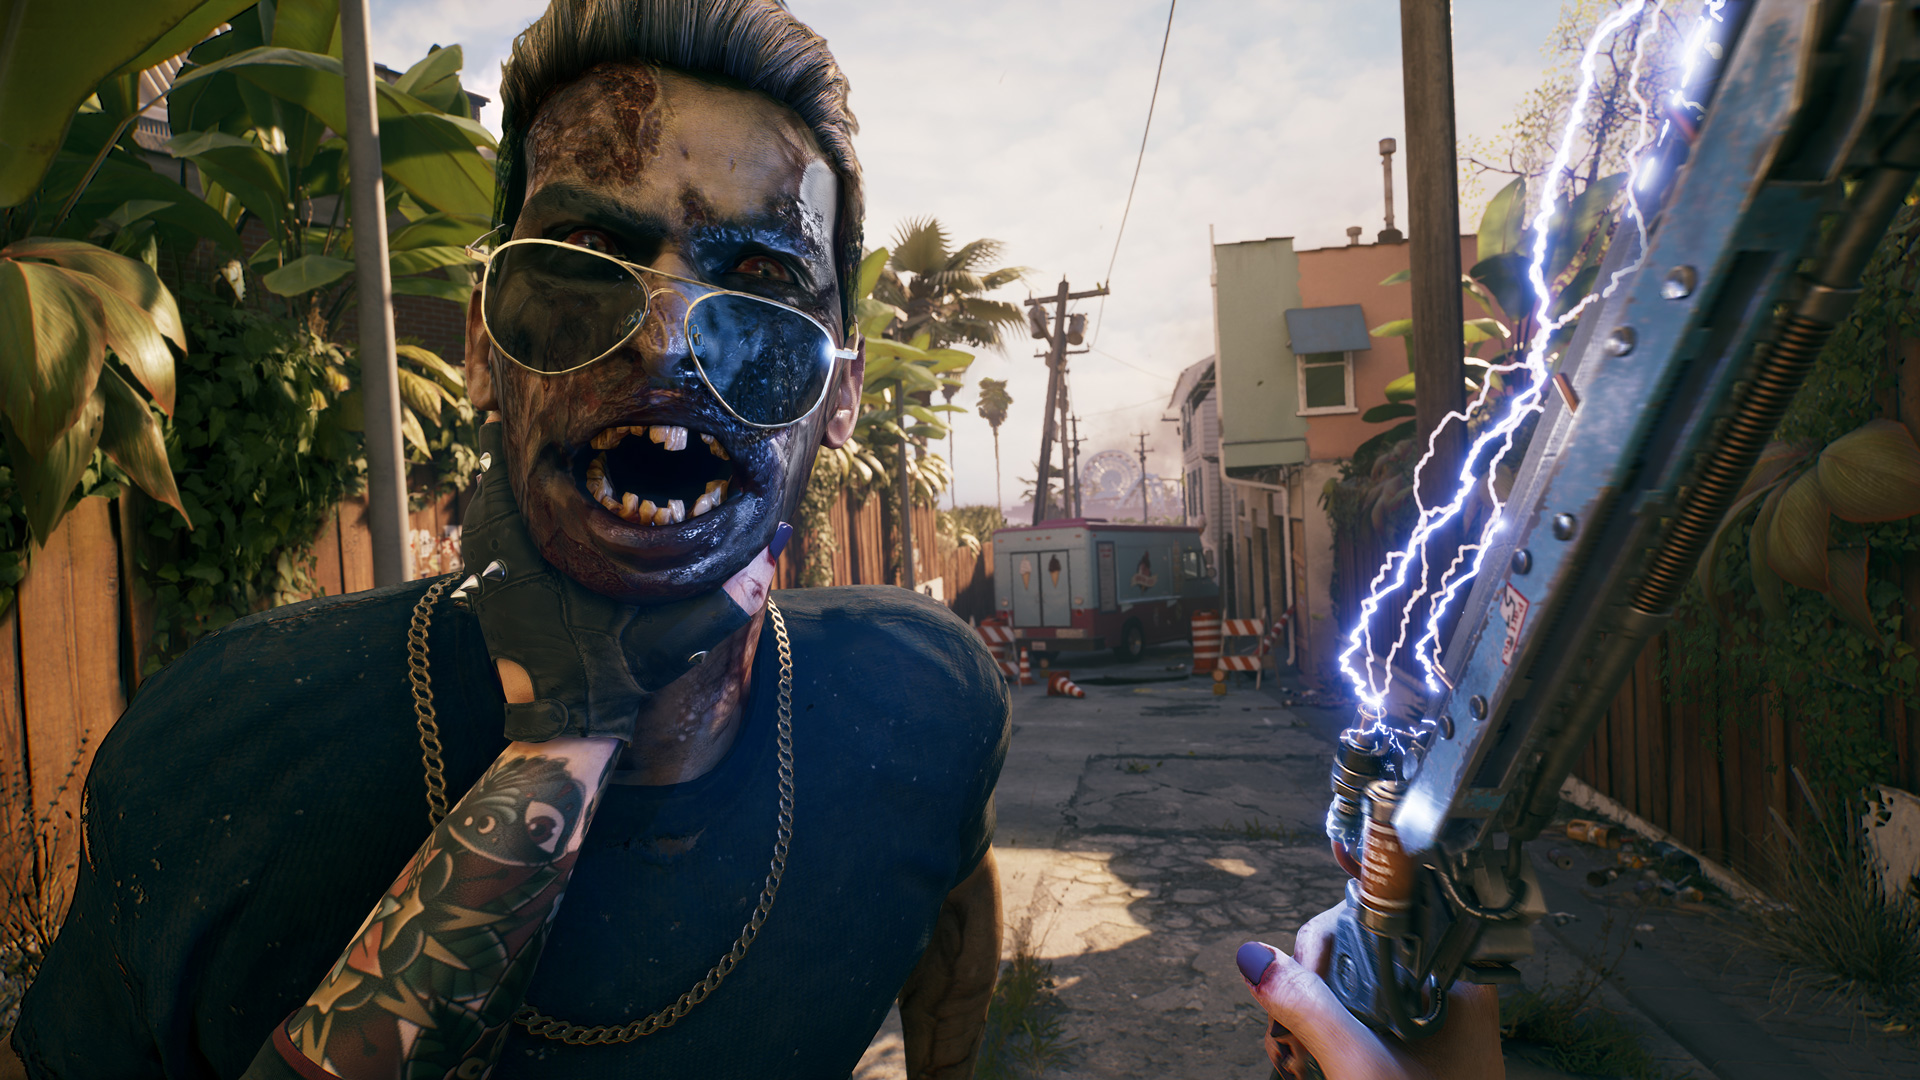 Dead Island 2 players pick up on a subtle yet really cool detail